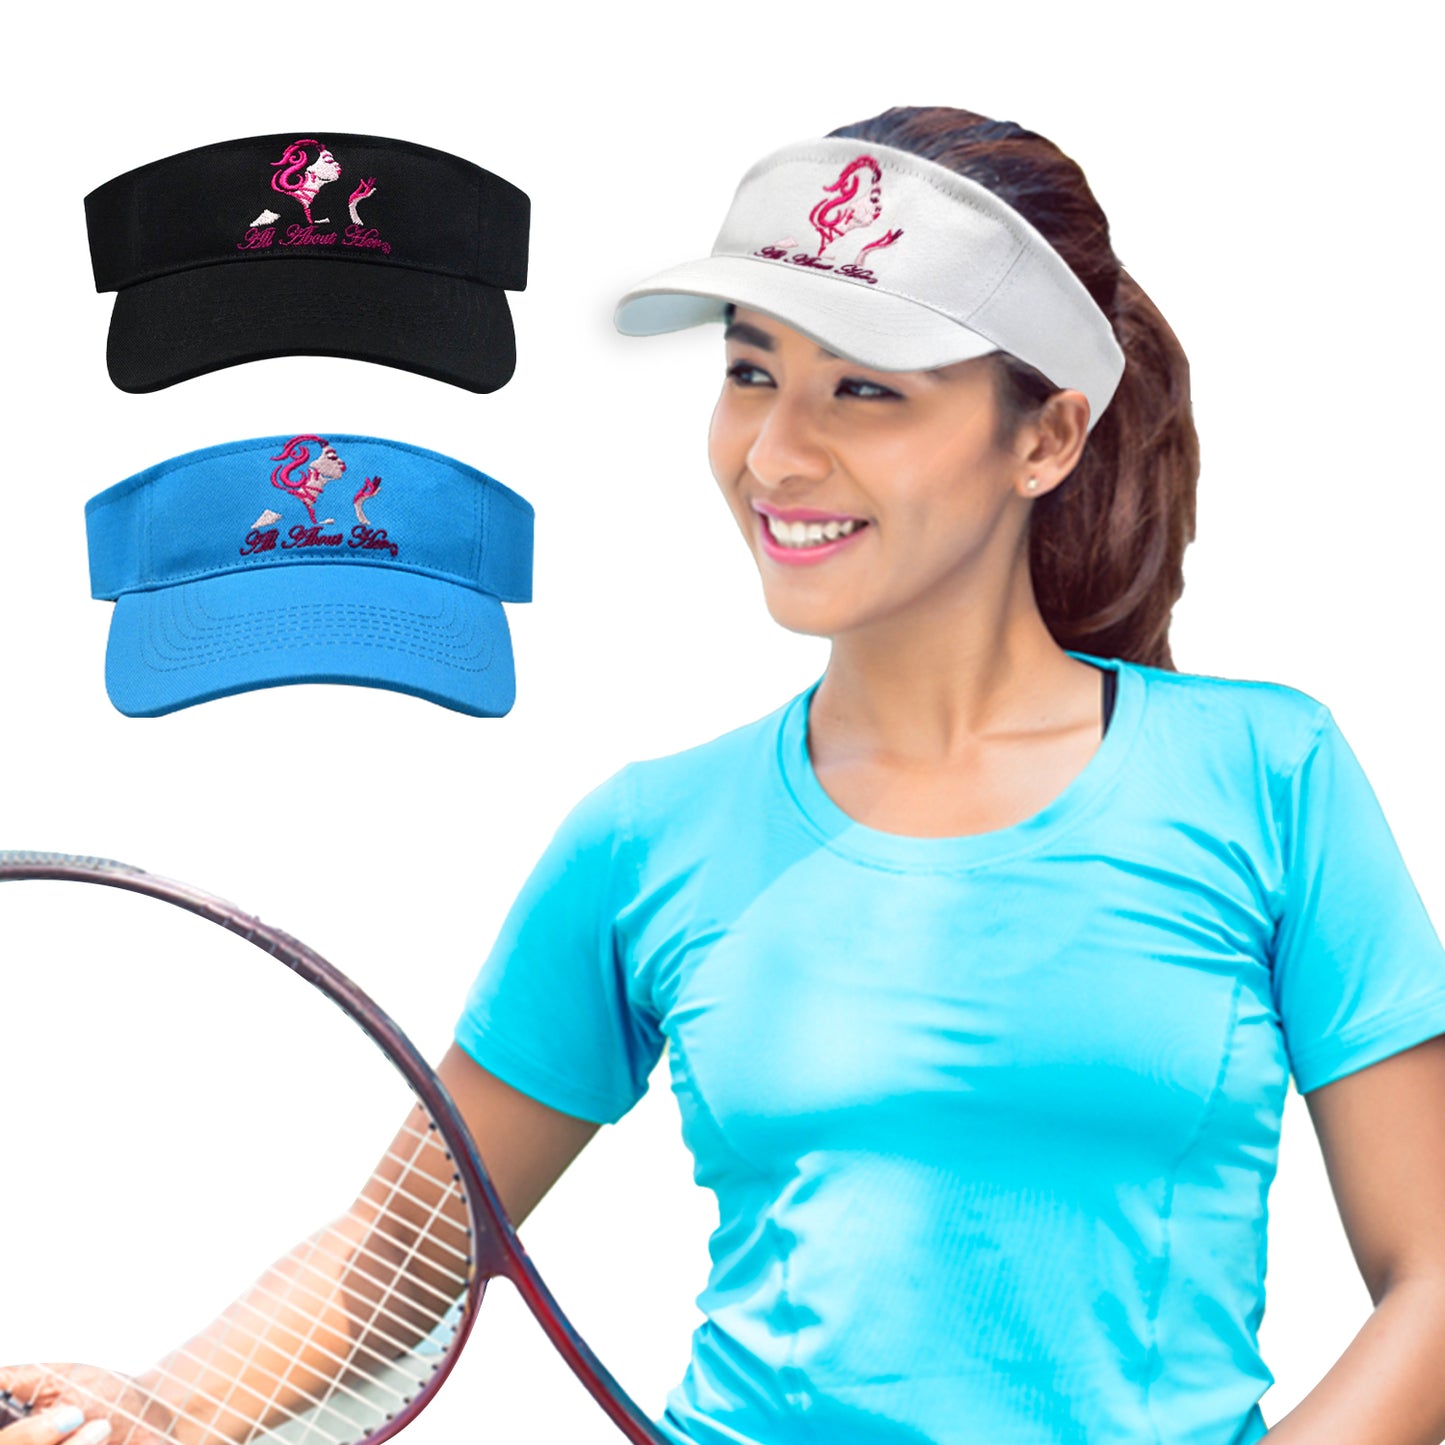 All About Her® 100 % Cotton 3D Embroidery Visor Hat for Women